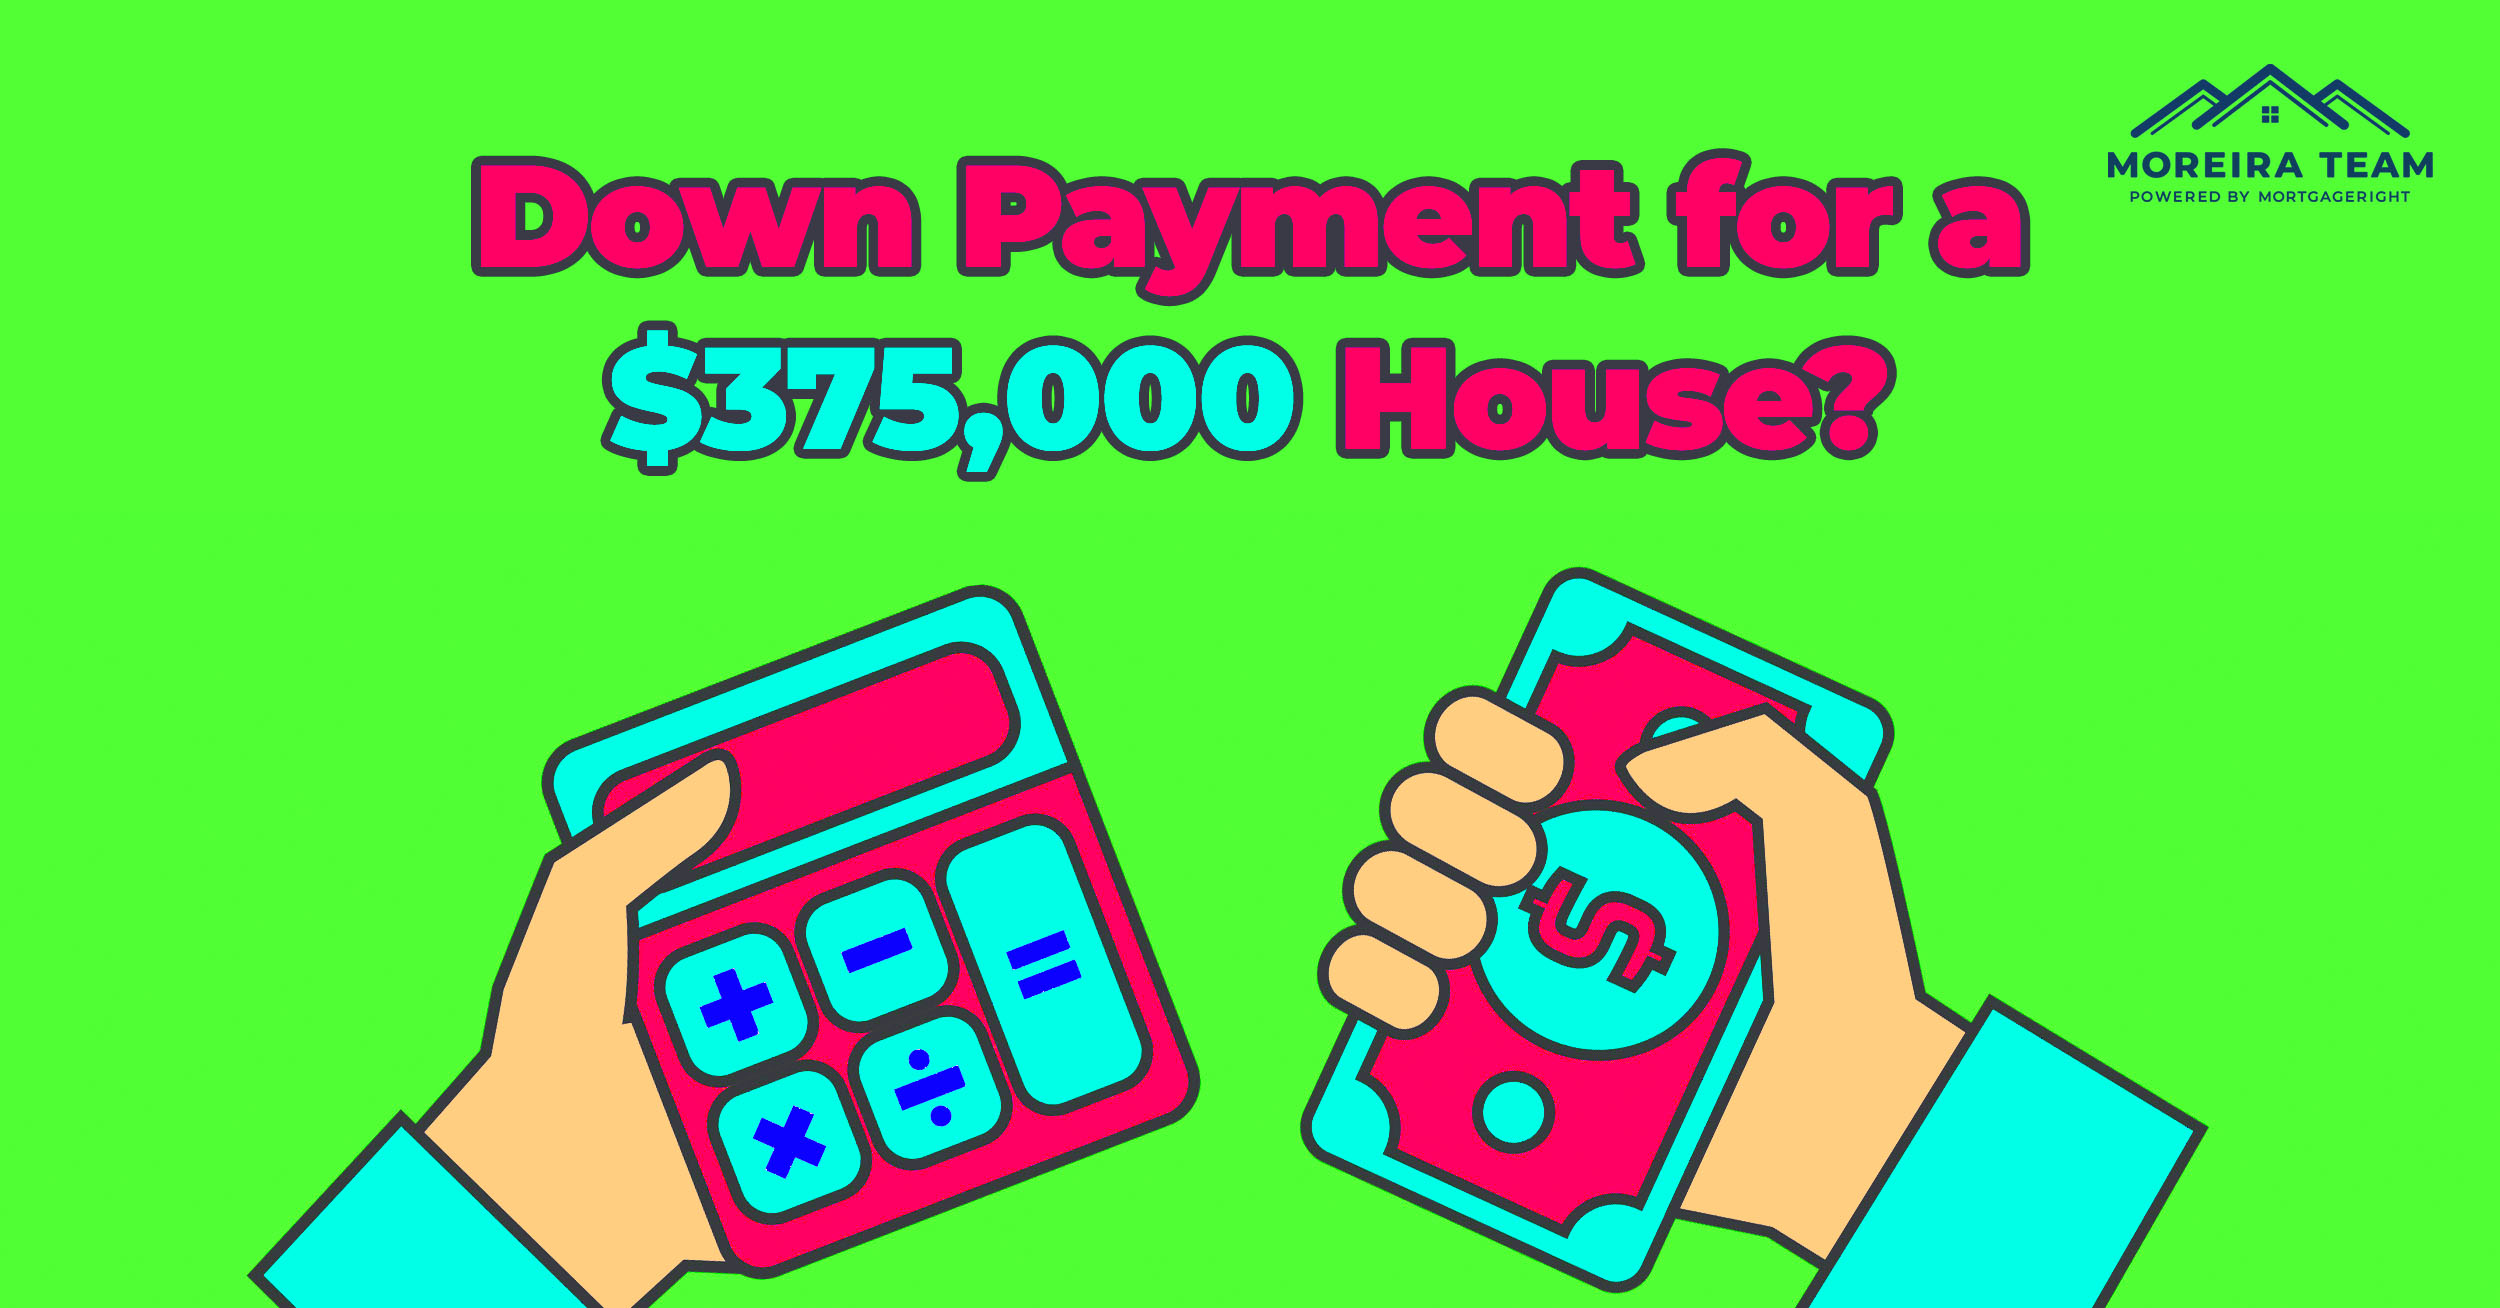 Down payment amount on a $375,000 house